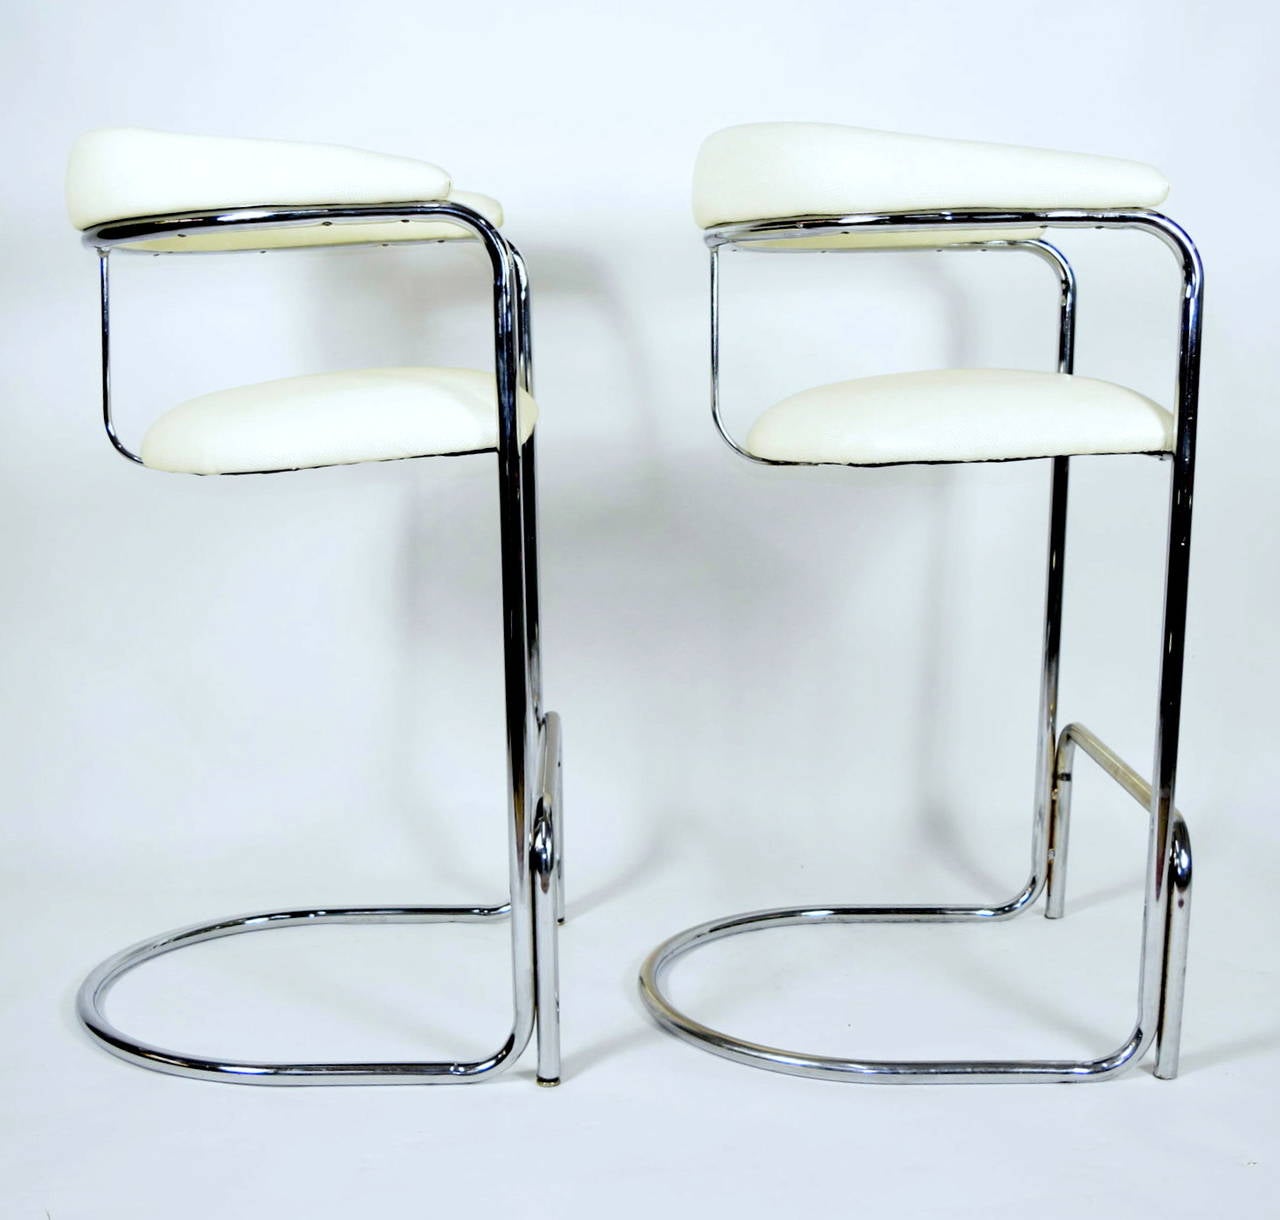 This is a great pair of barstools very much like Thonet and likely they are Thonet. They have been reupholstered in a Duralee snakeskin vinyl which is very durable. The chrome is in beautiful condition.